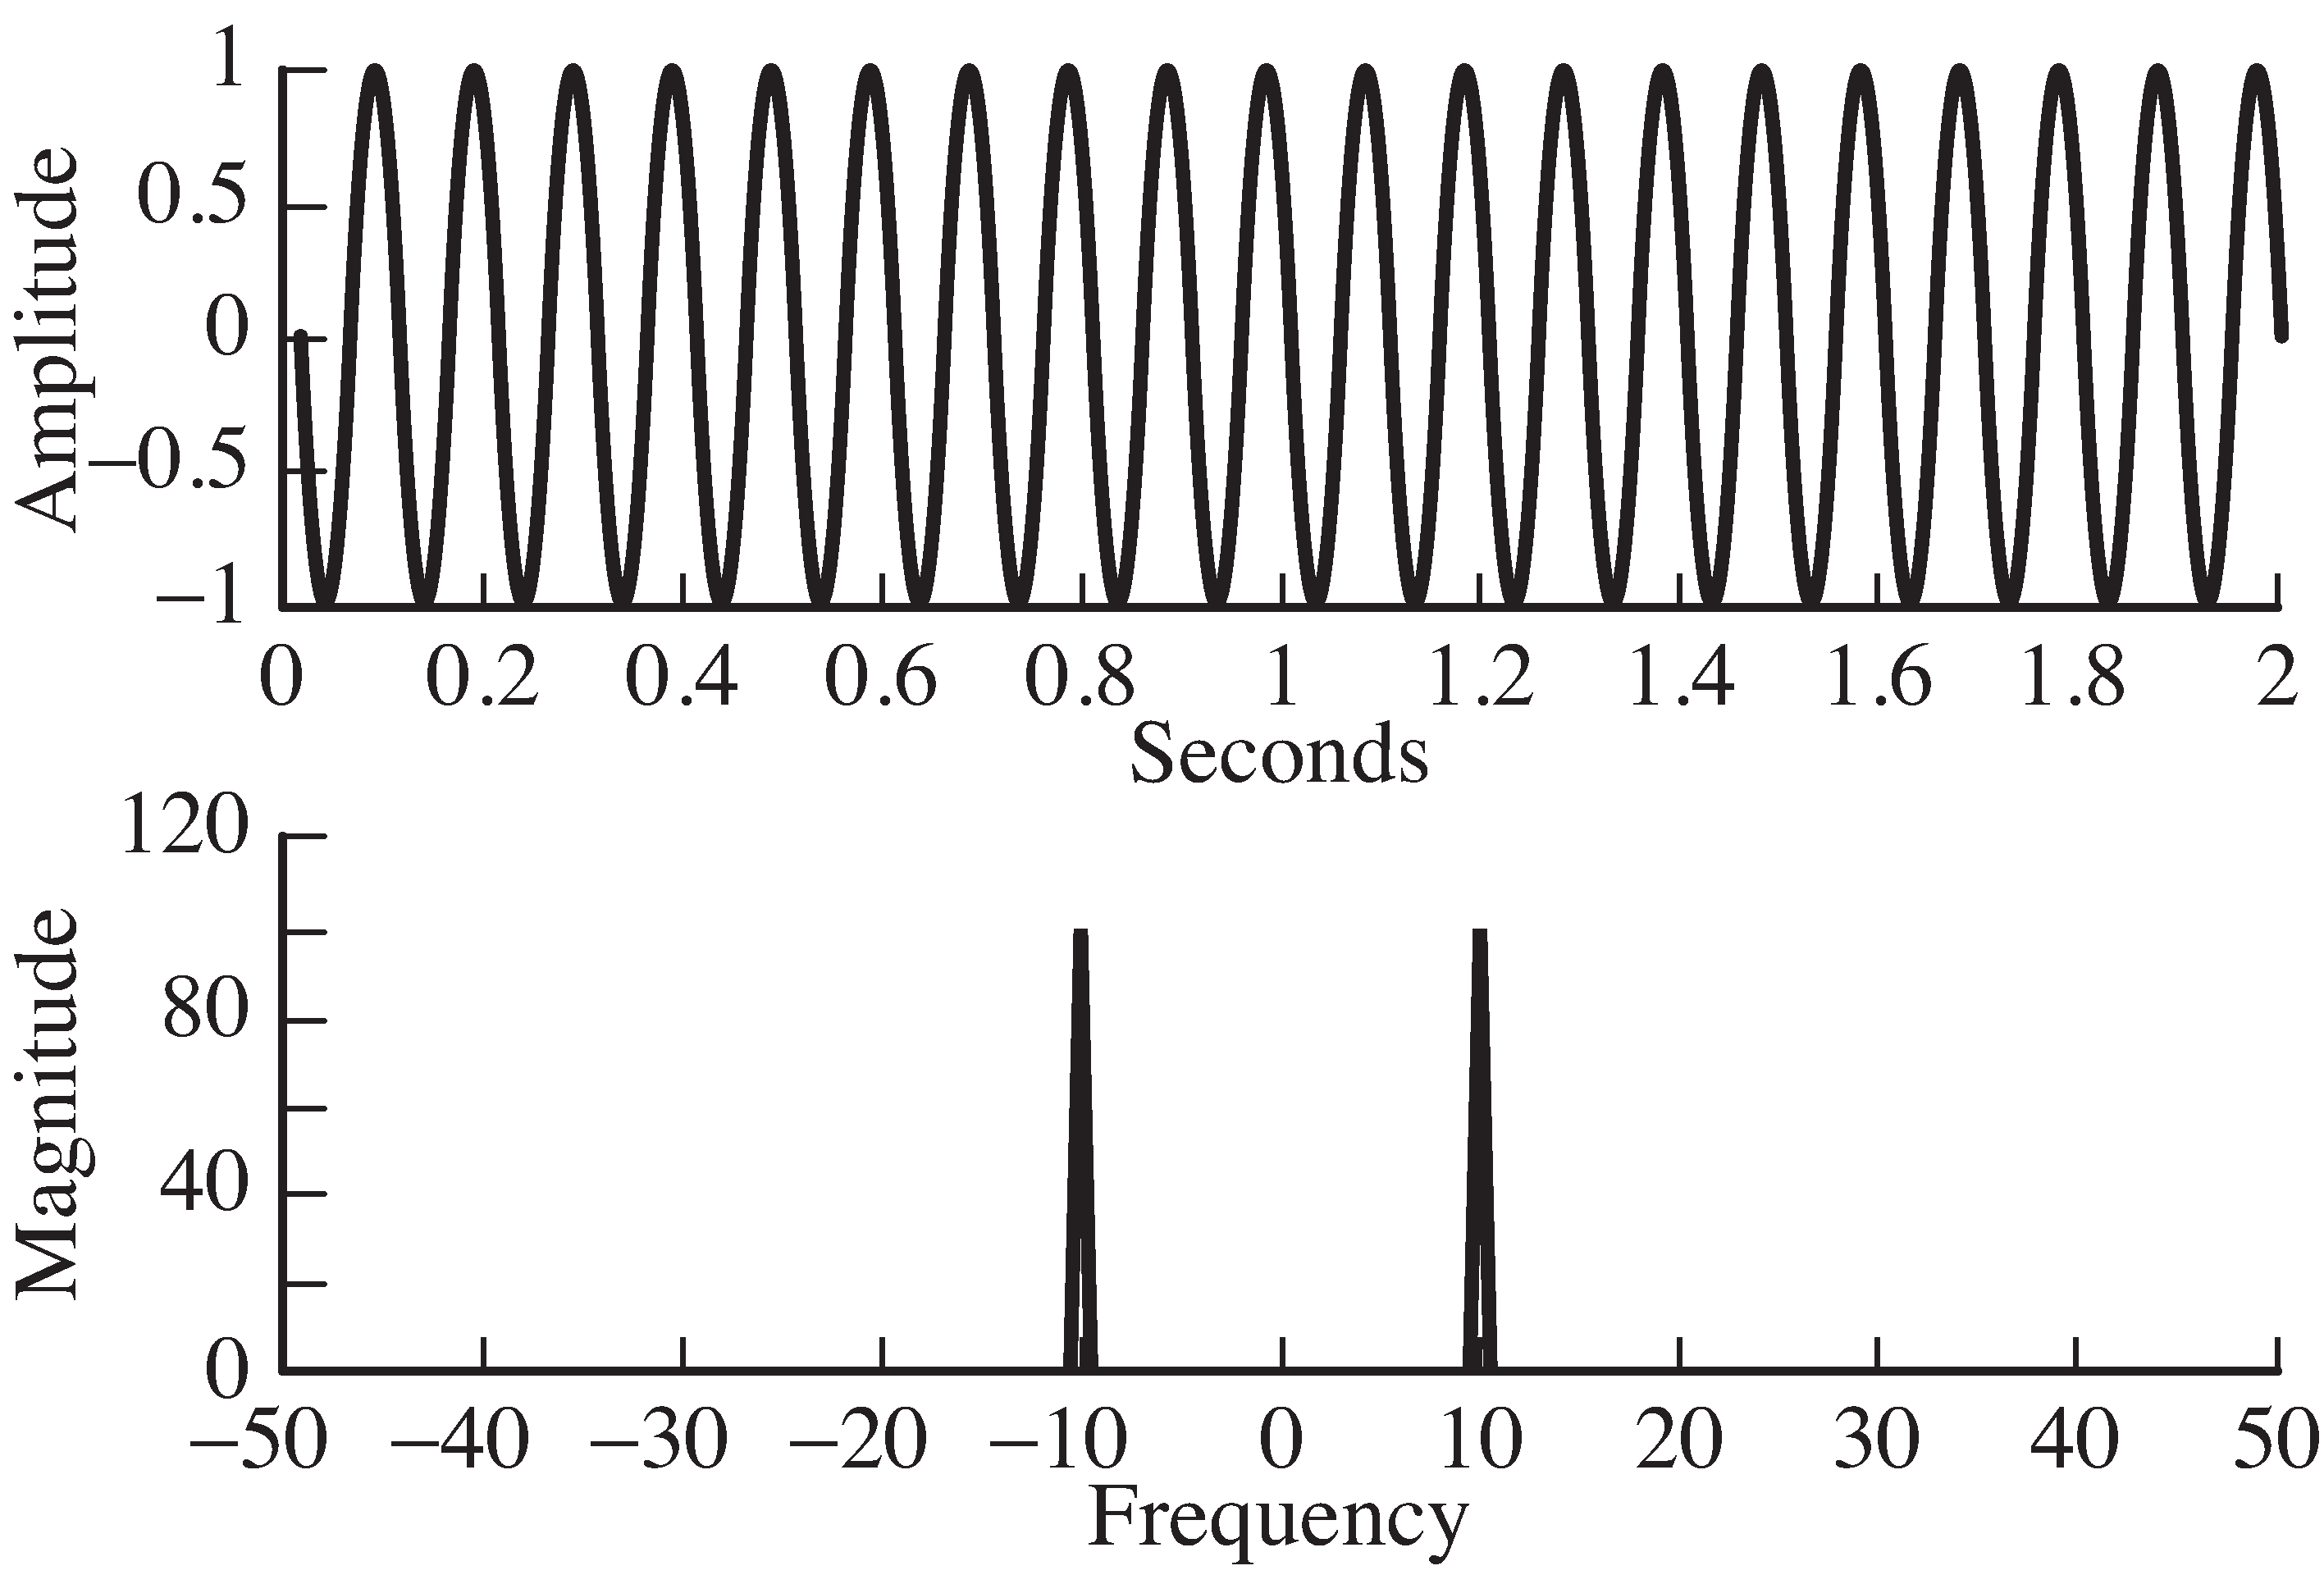 A sinusoidal oscillator creates a signal that can be viewed in the time domain as in the top plot, or in the frequency domain as in the bottom plot.